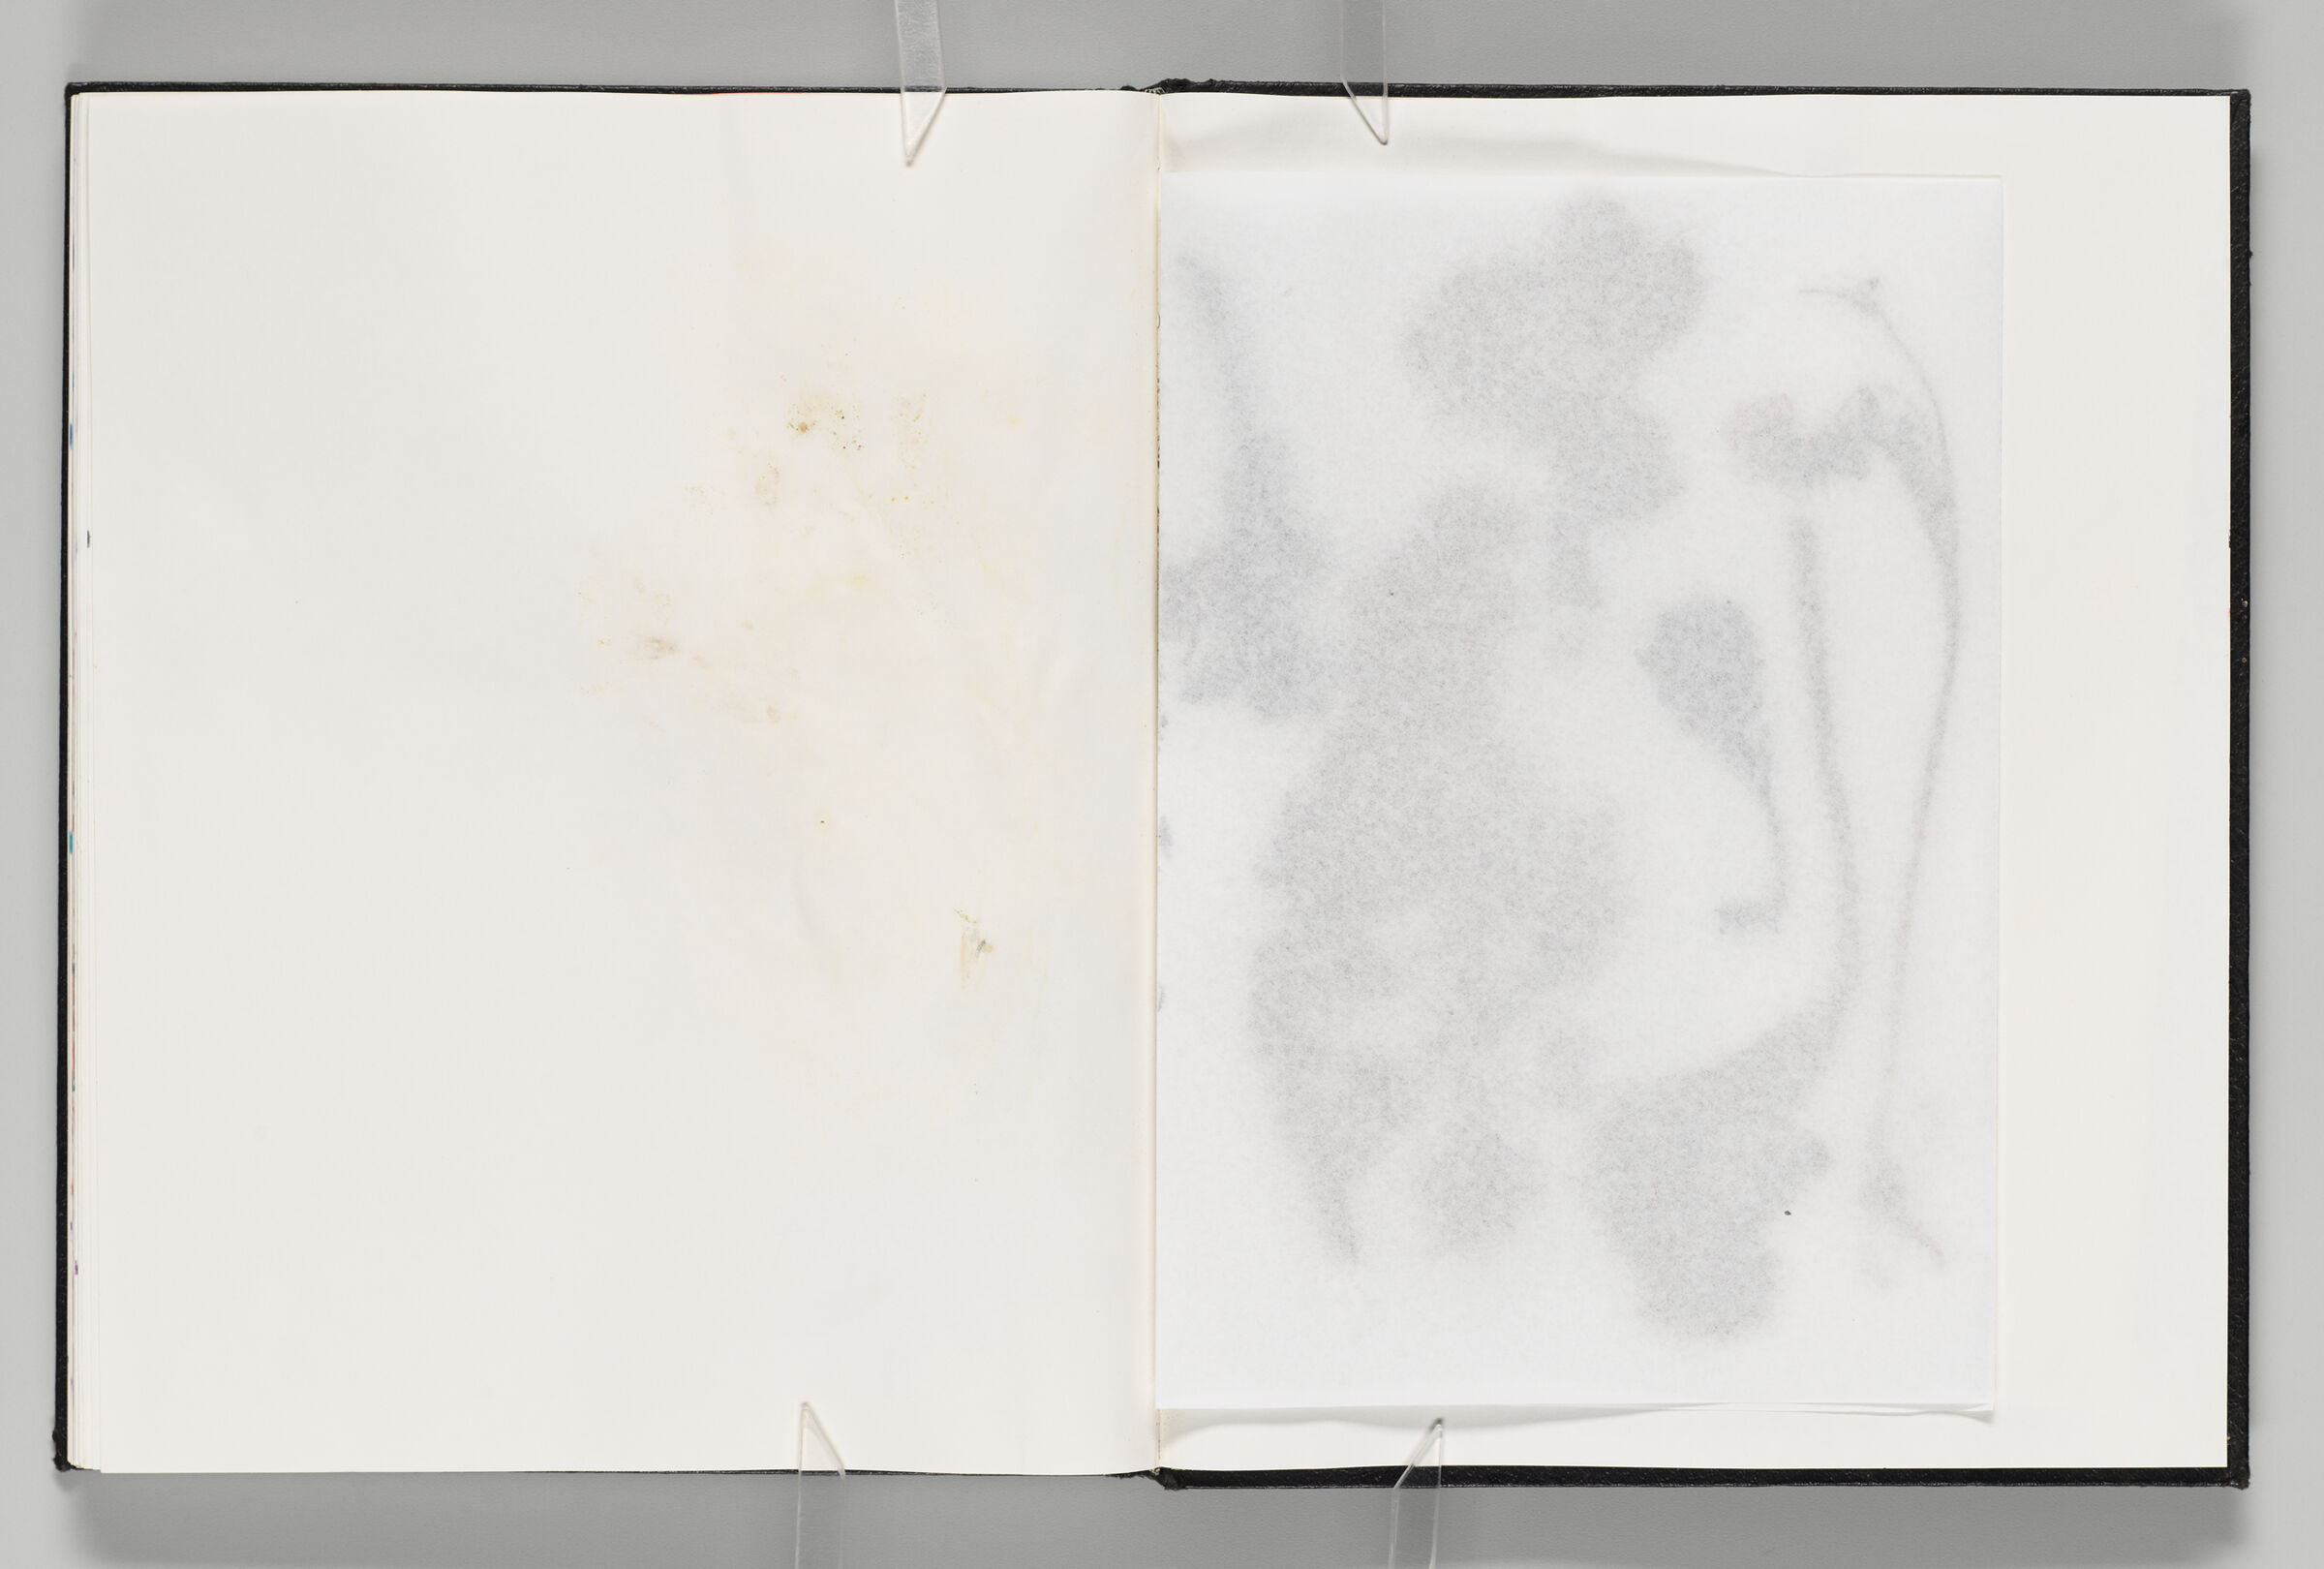 Untitled (Bleed-Through Of Flower Stains, Left Page); Untitled (Faint Flower Stains, Right Page)